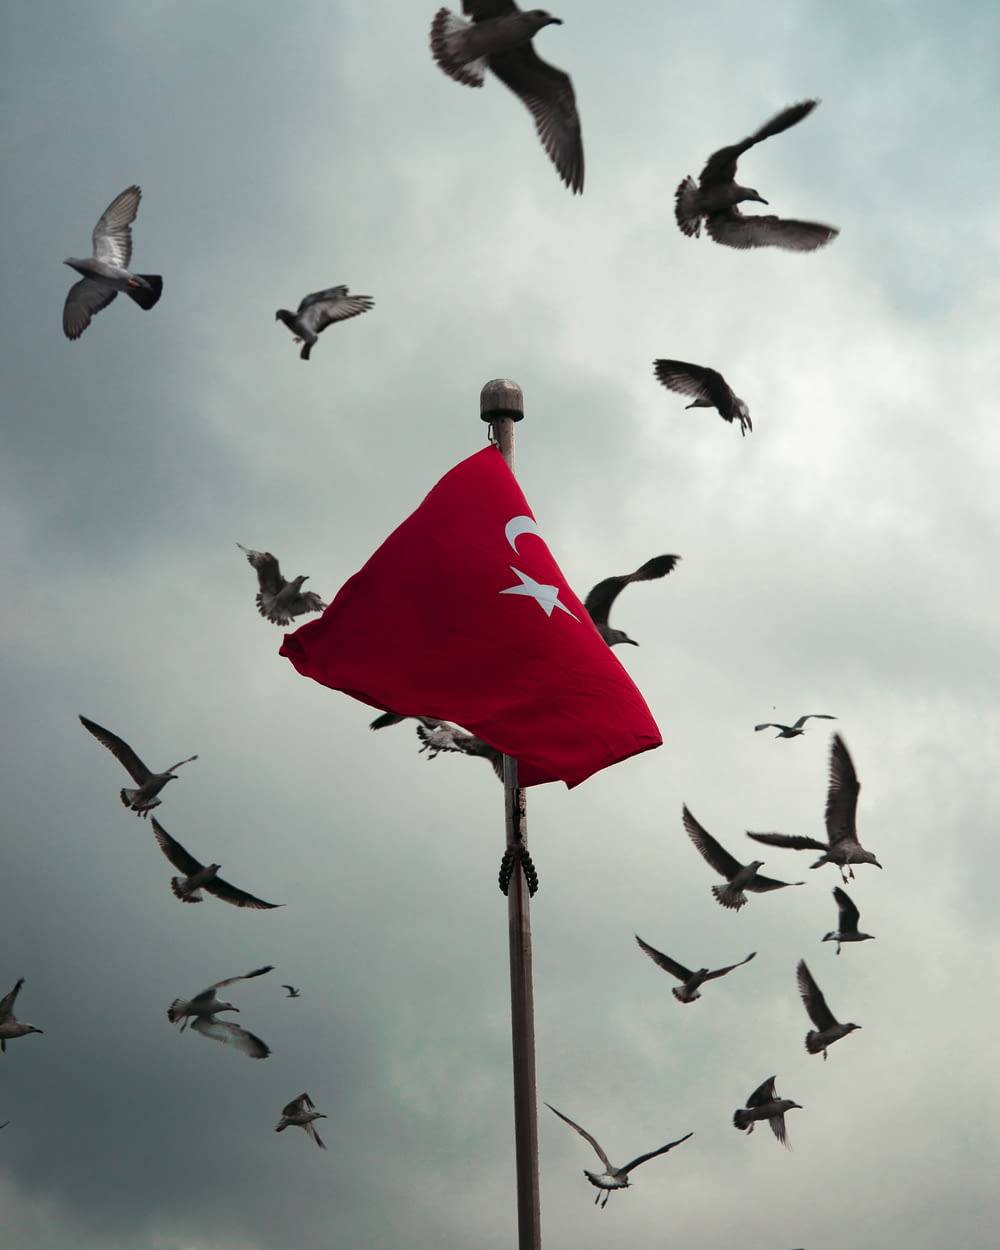 a flock of birds flying around a red flag